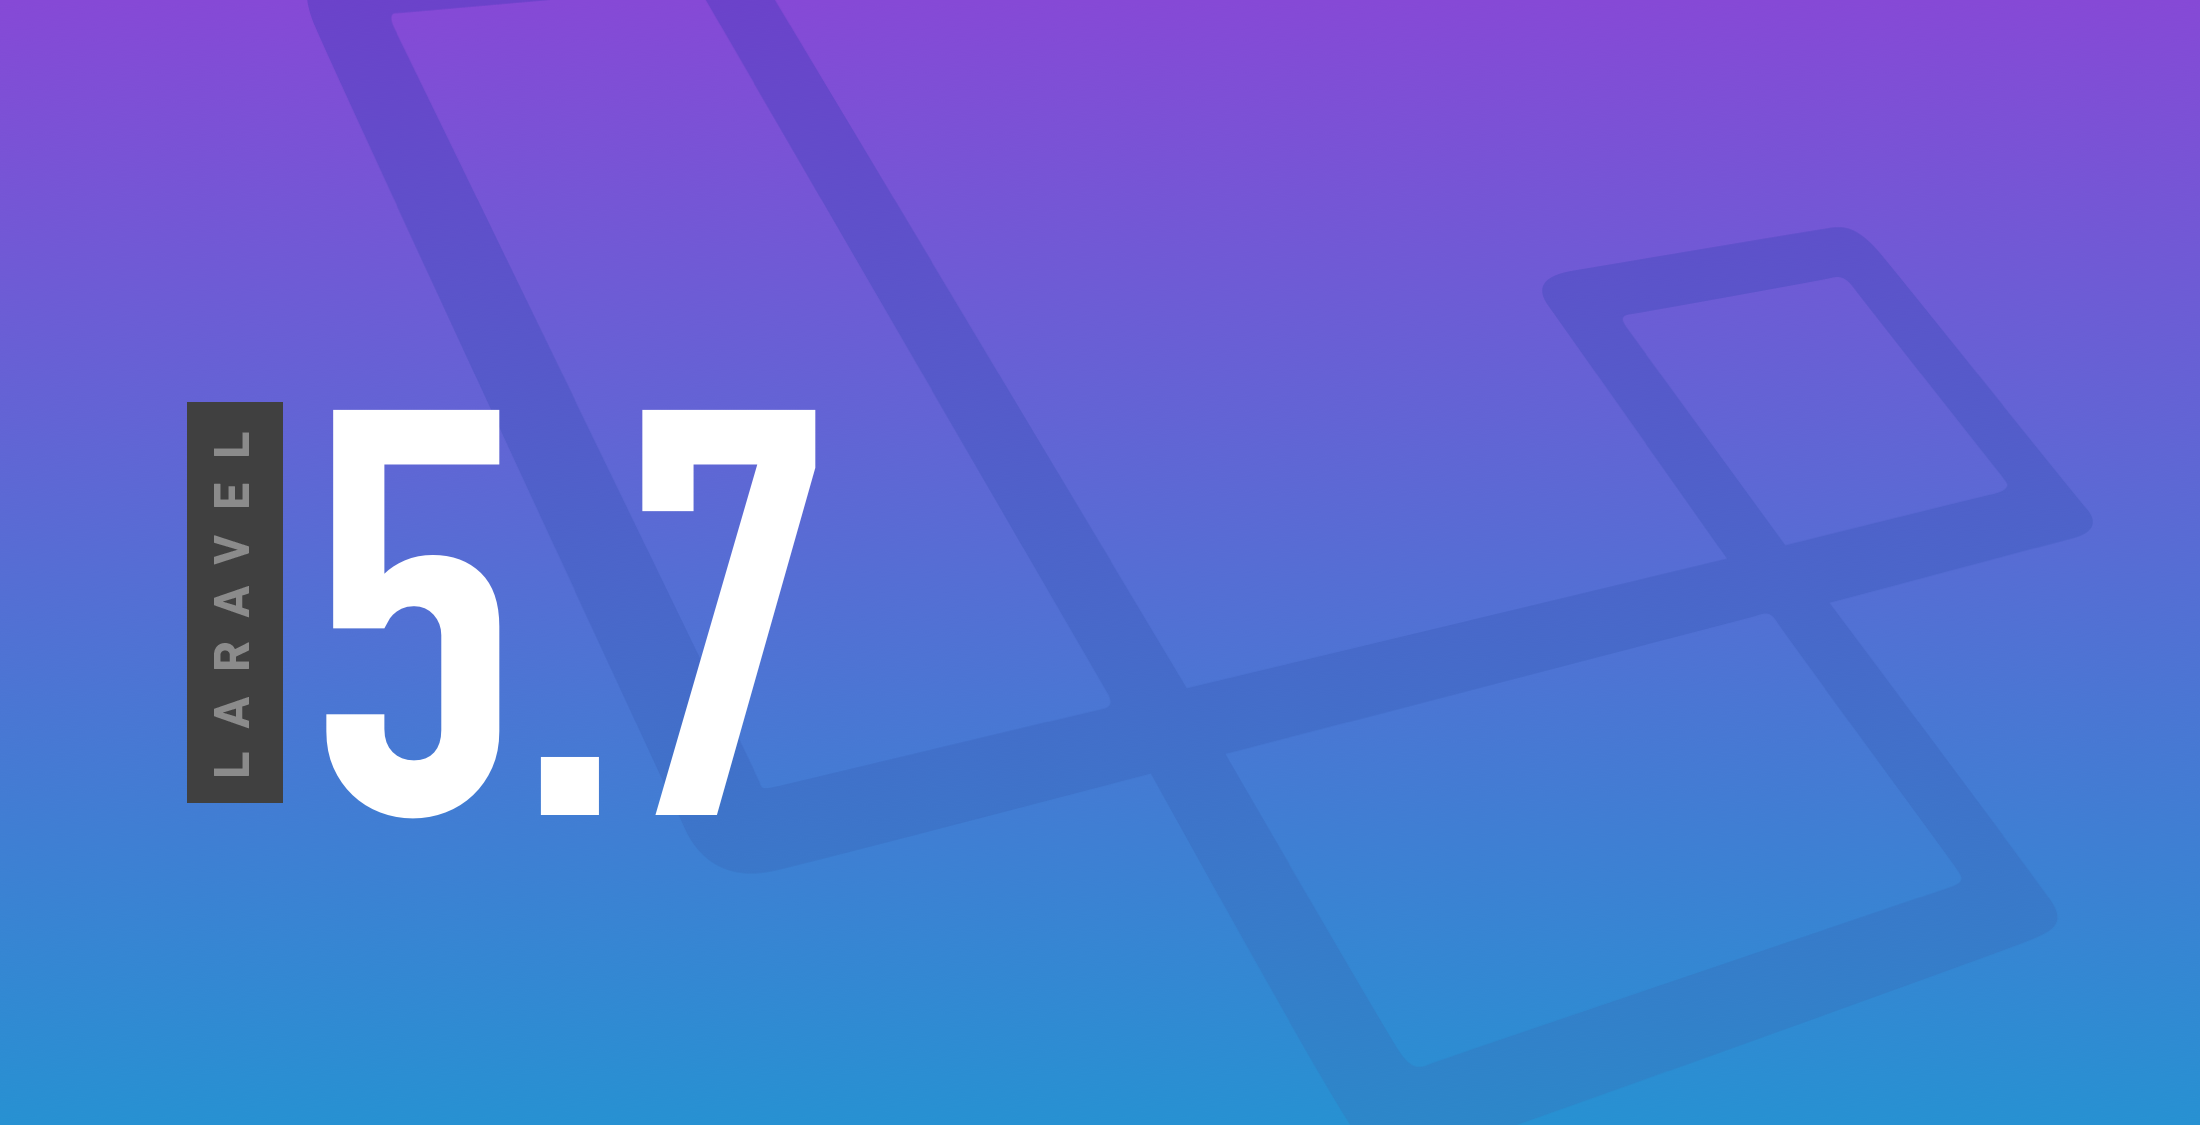 Laravel 5.7 is now released! image